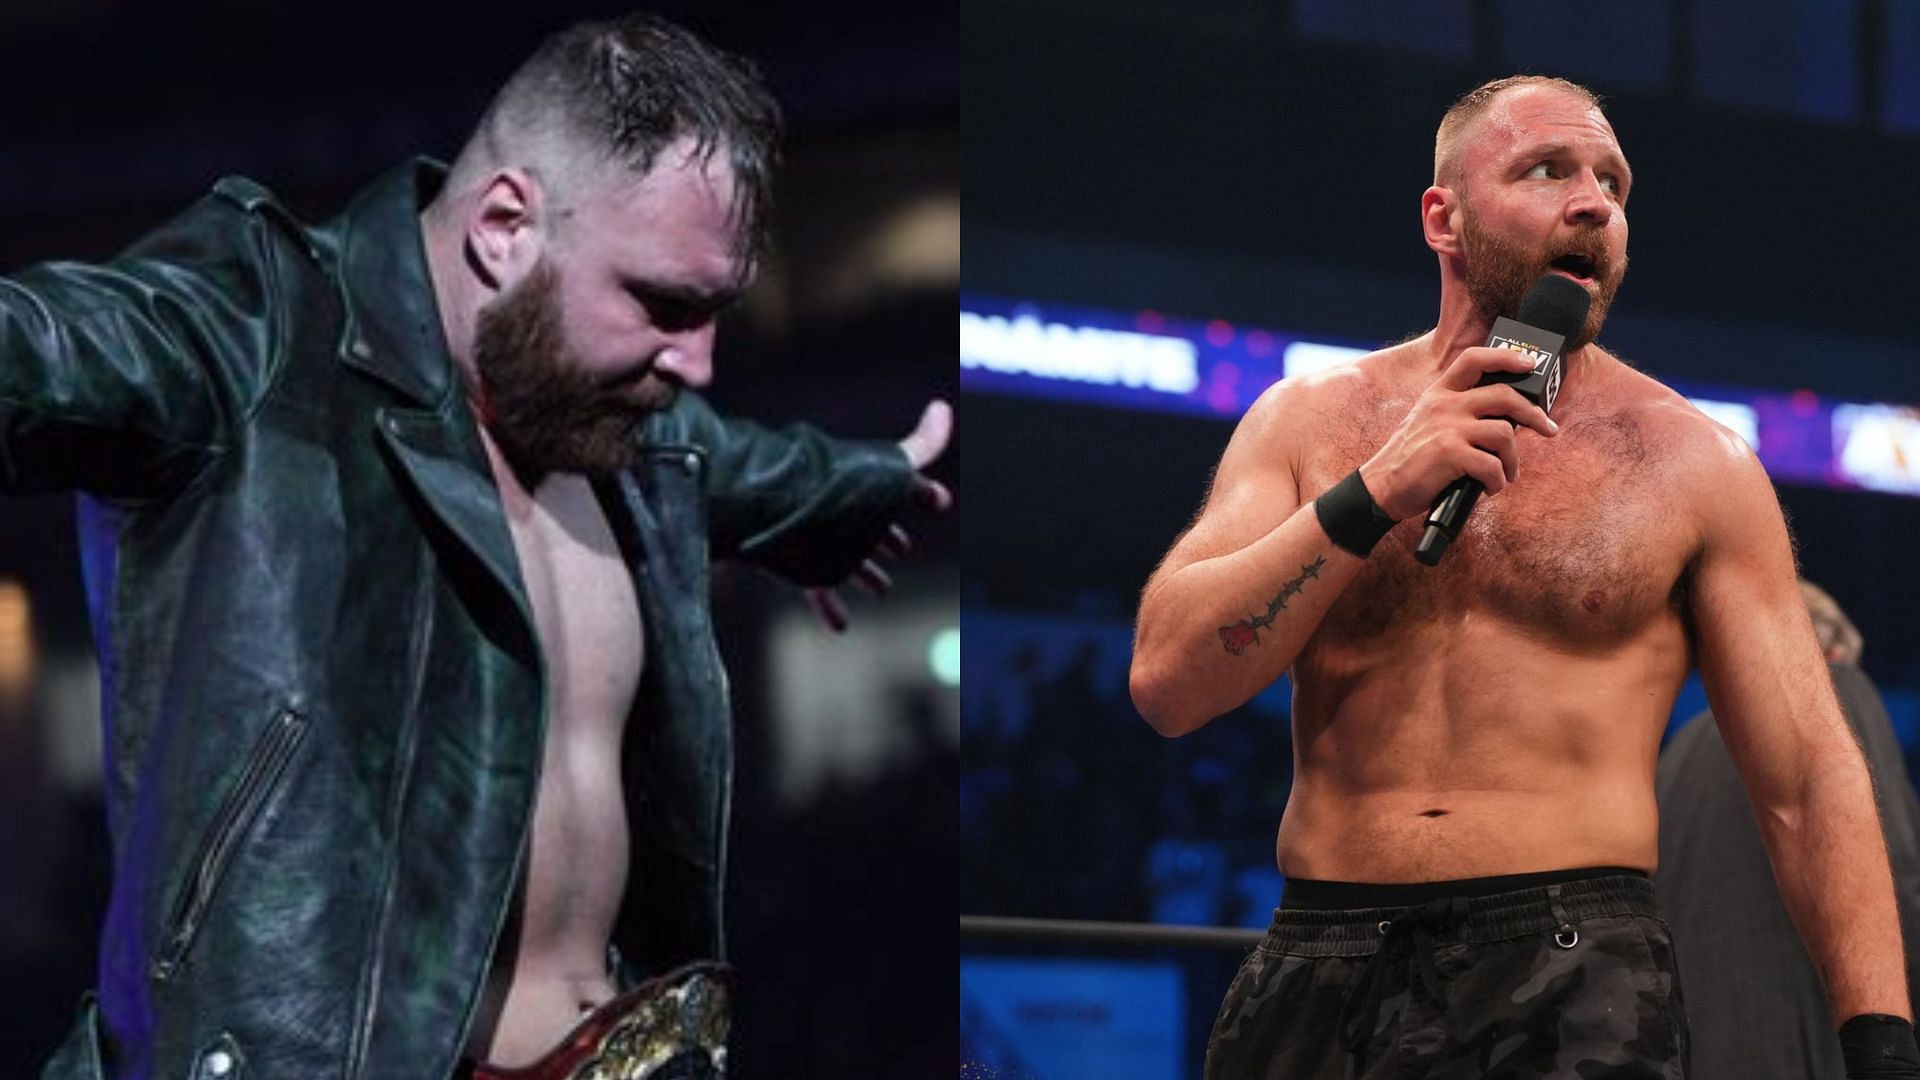 A look at Jon Moxley's transformation before and after rehab